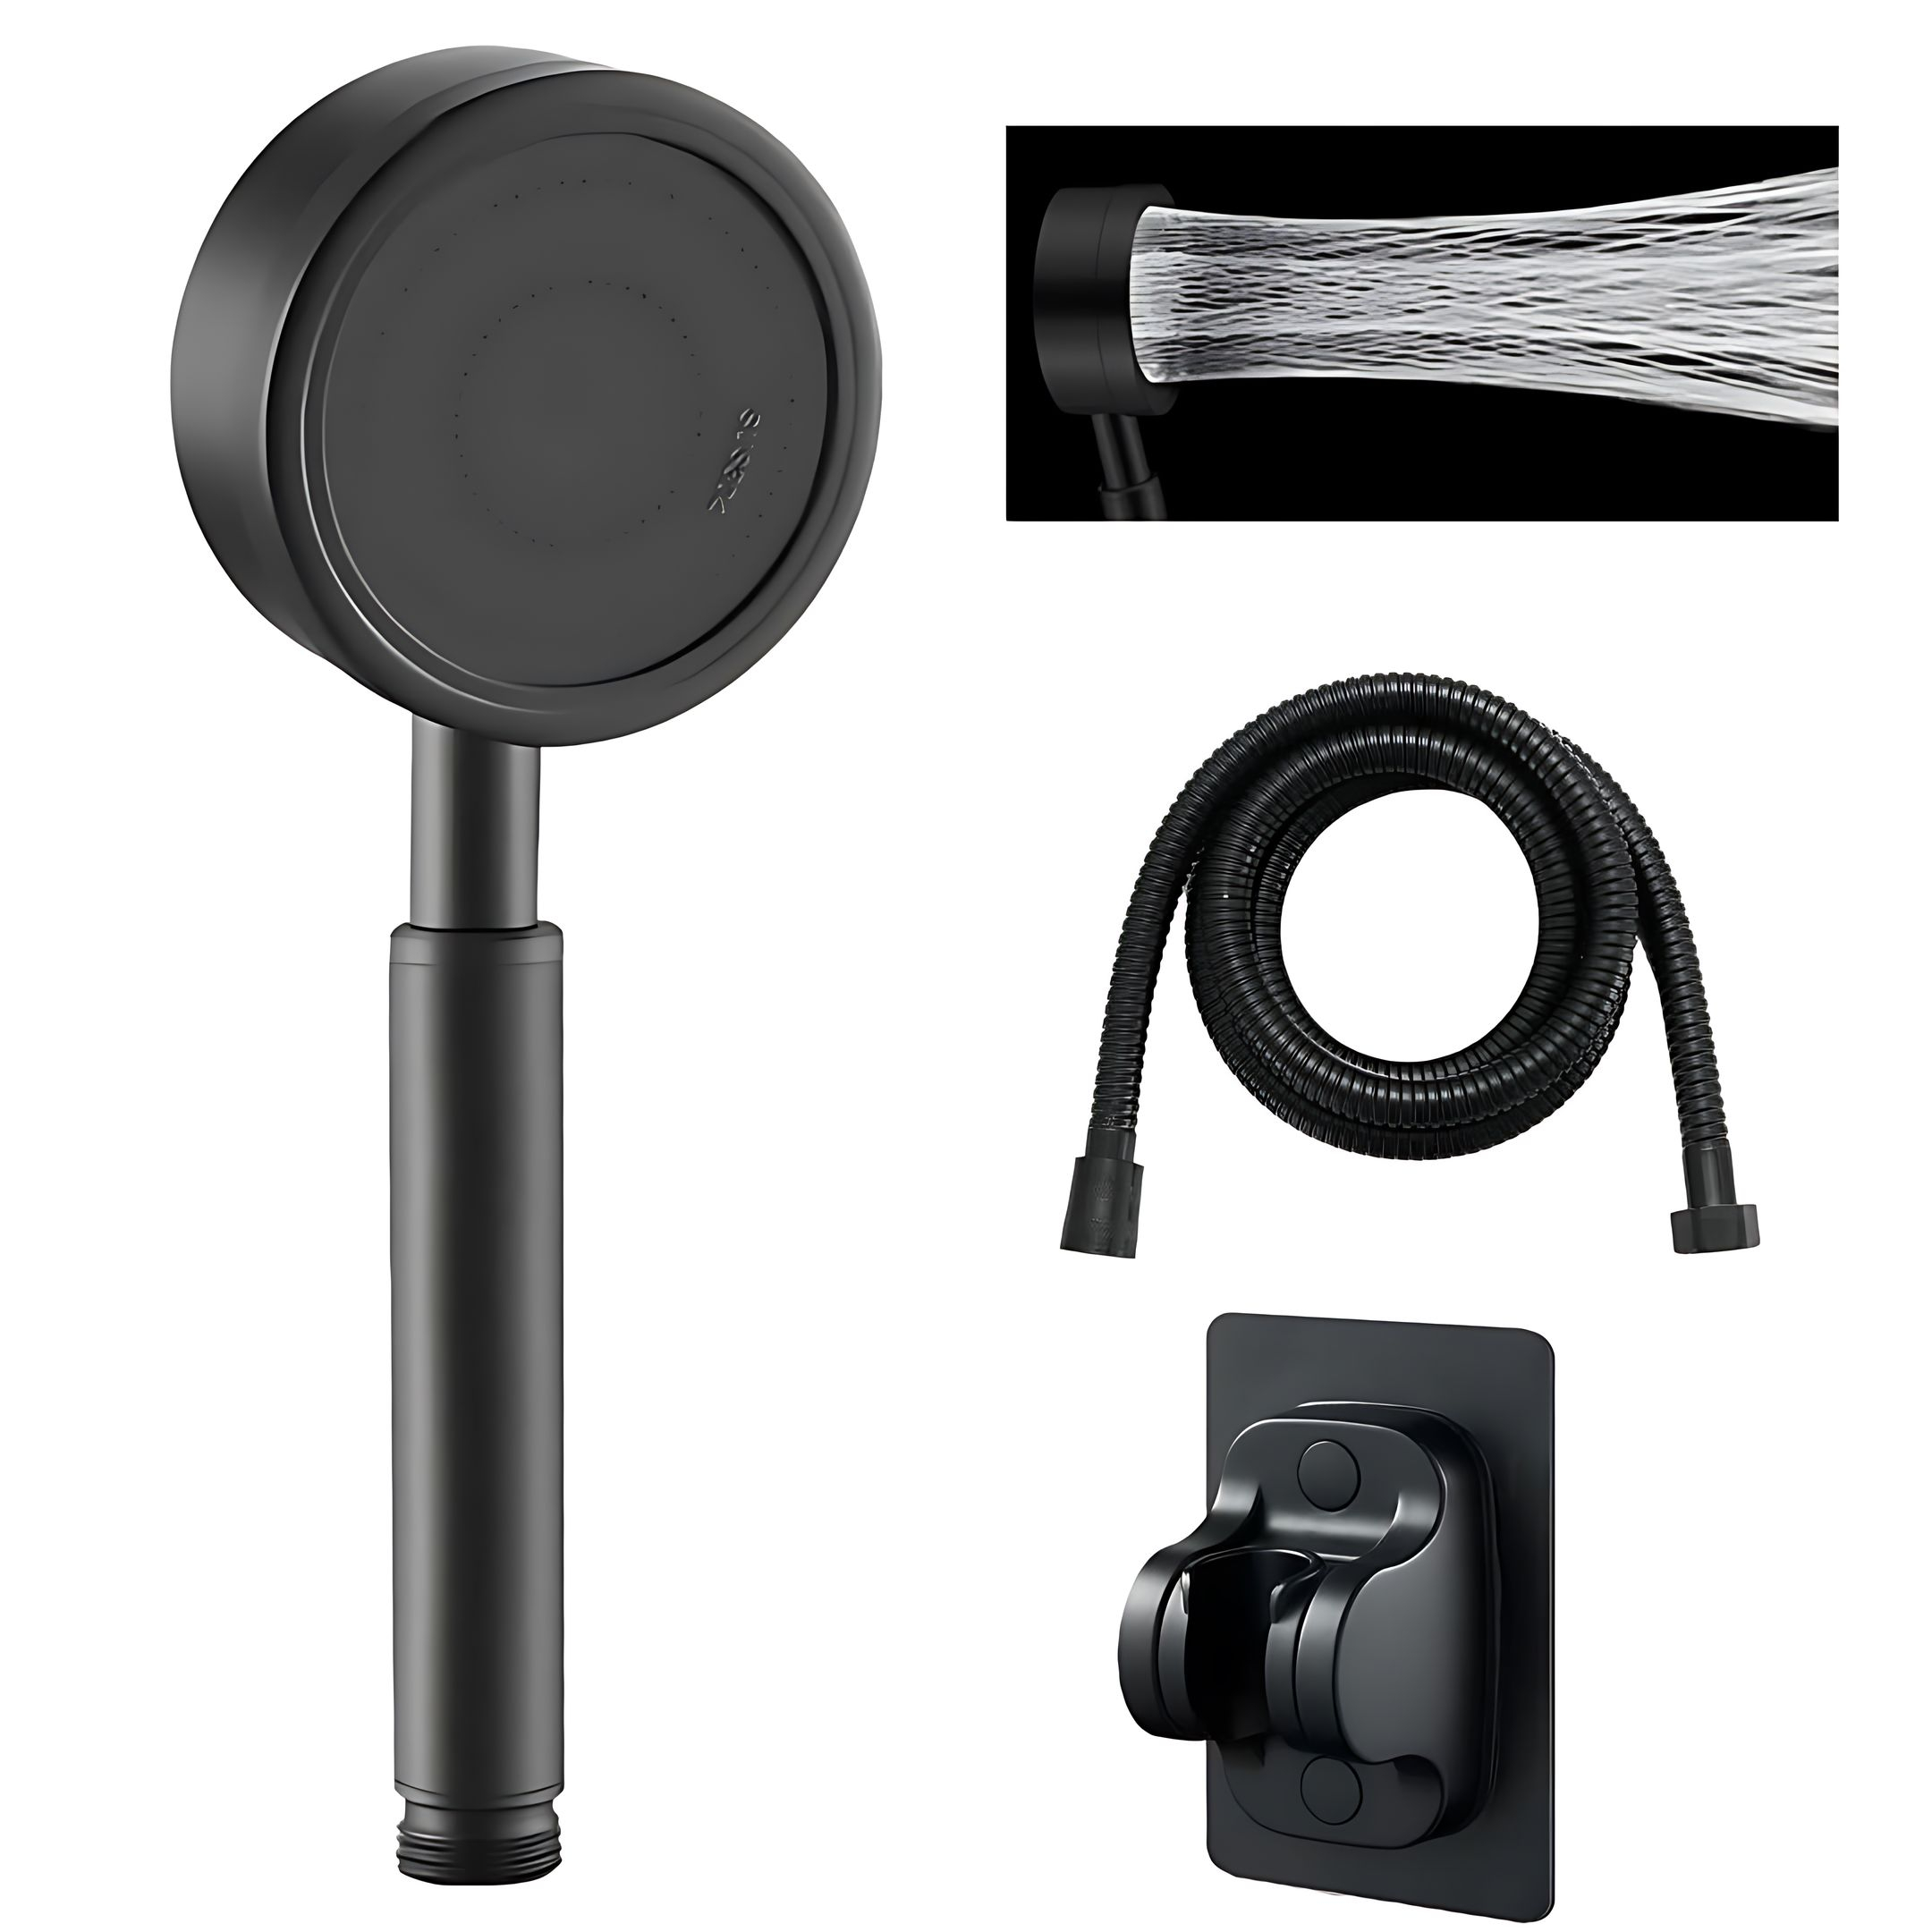 

Black Stainless Steel Booster Shower Set Home Bathroom Shower Hose Shower Punch-free Bracket Anti-fall Durable Filter Unique Water Outlet Handheld Shower Head